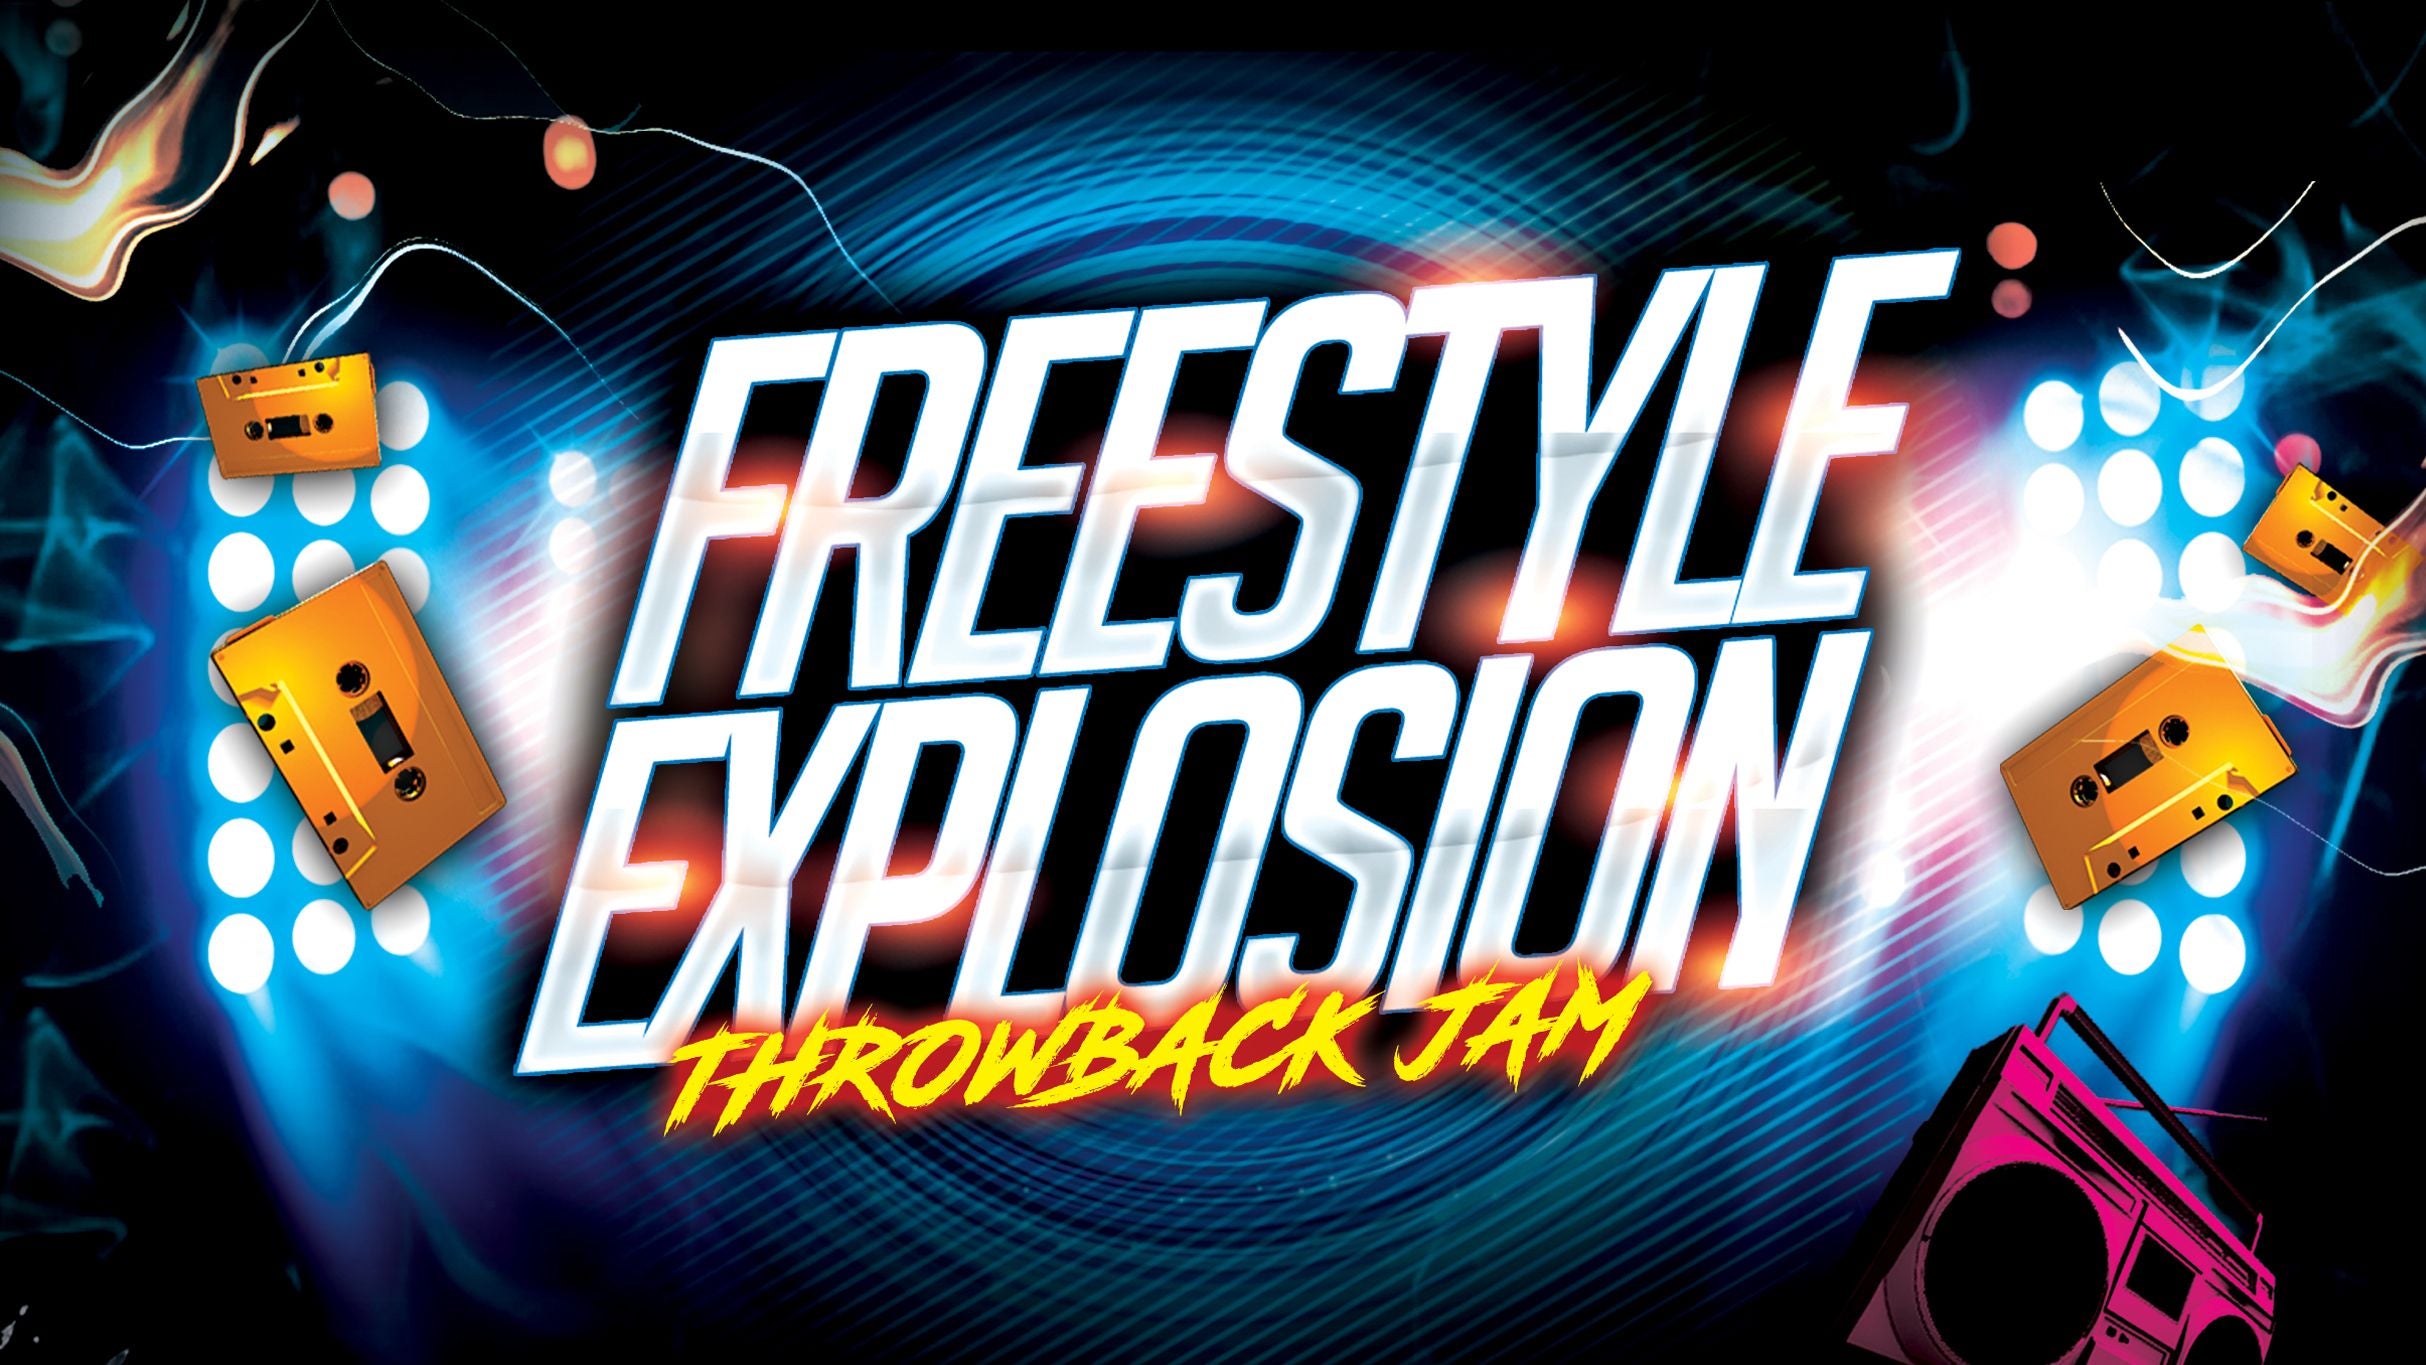 Freestyle Explosion presale password for real tickets in Palm Desert